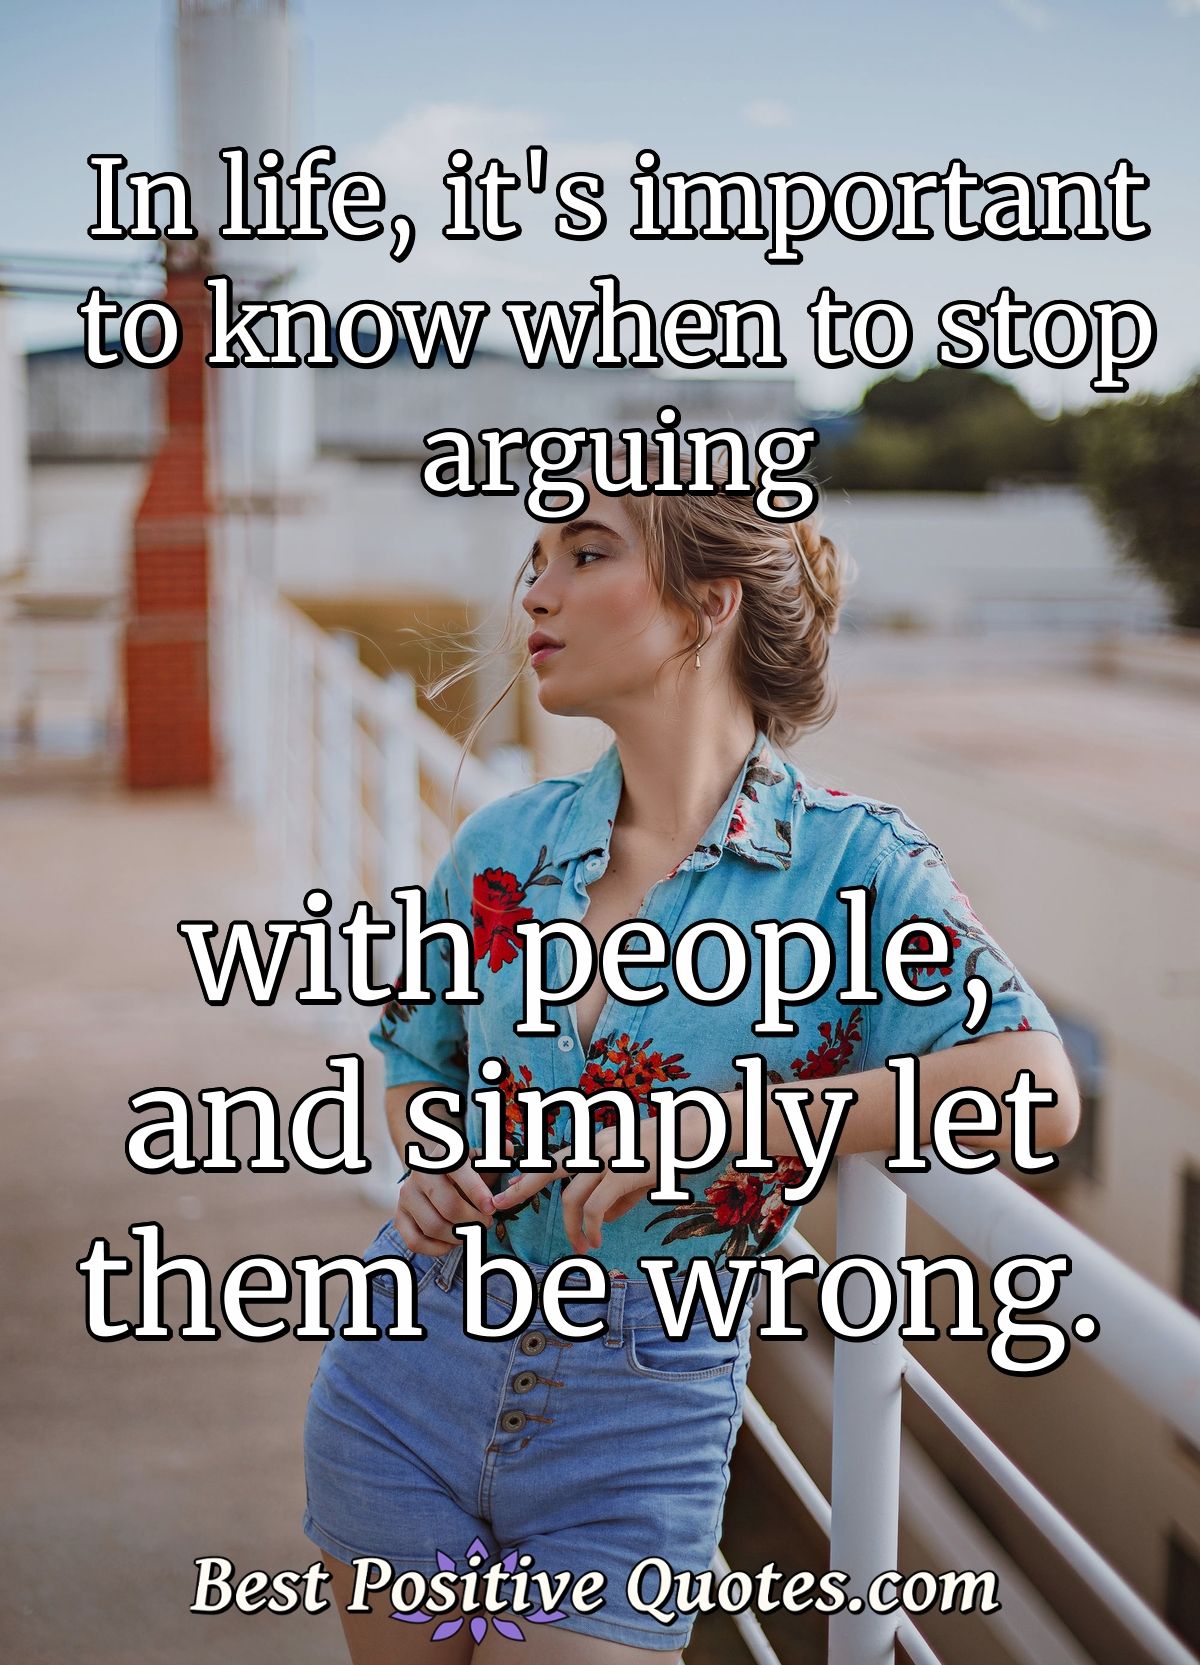 In life, it's important to know when to stop arguing with people, and simply let them be wrong. - Anonymous